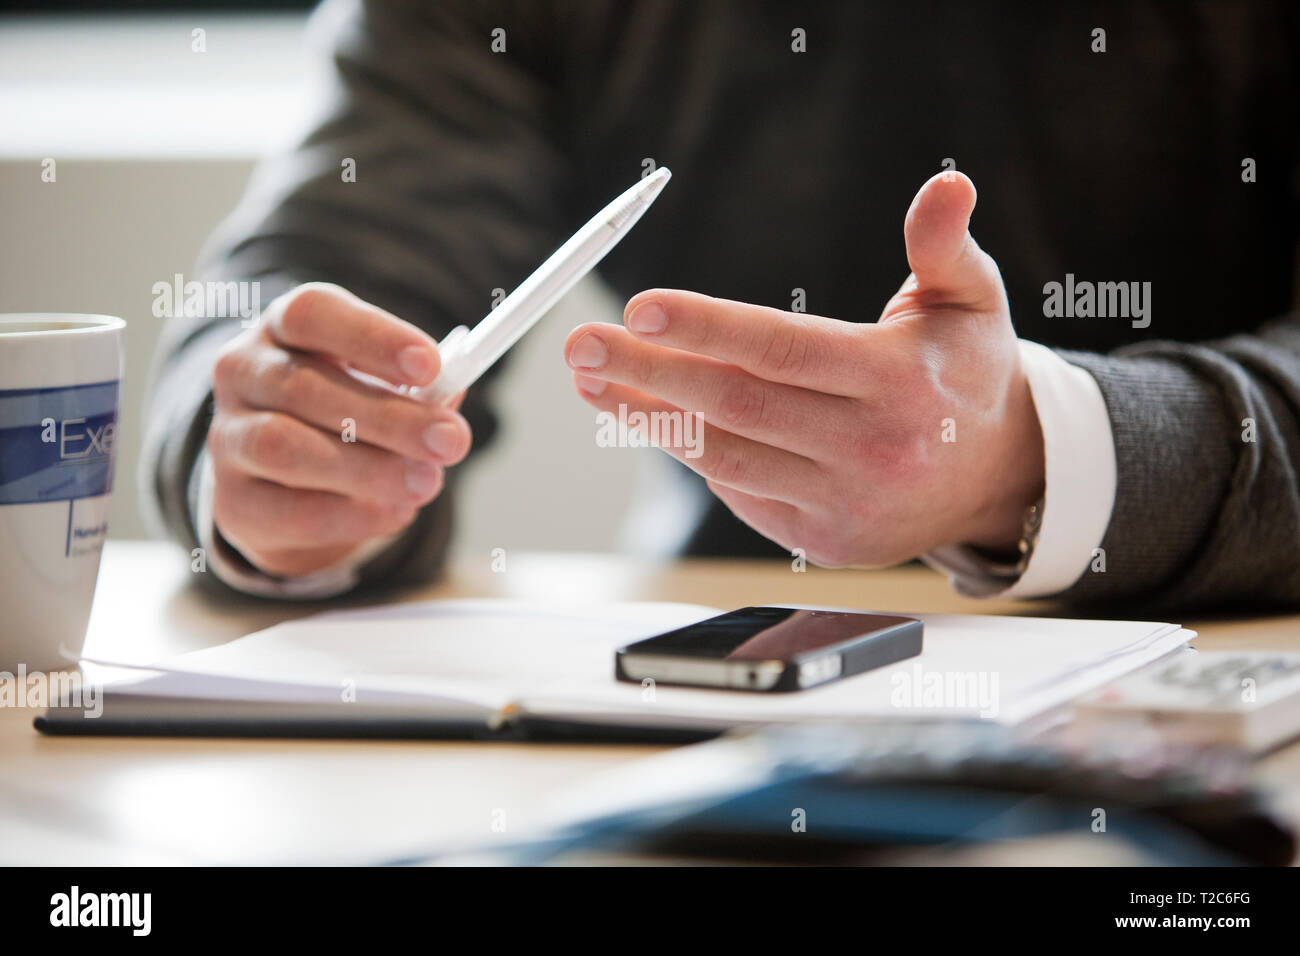 Hands of office worker engaged in discussion Stock Photo